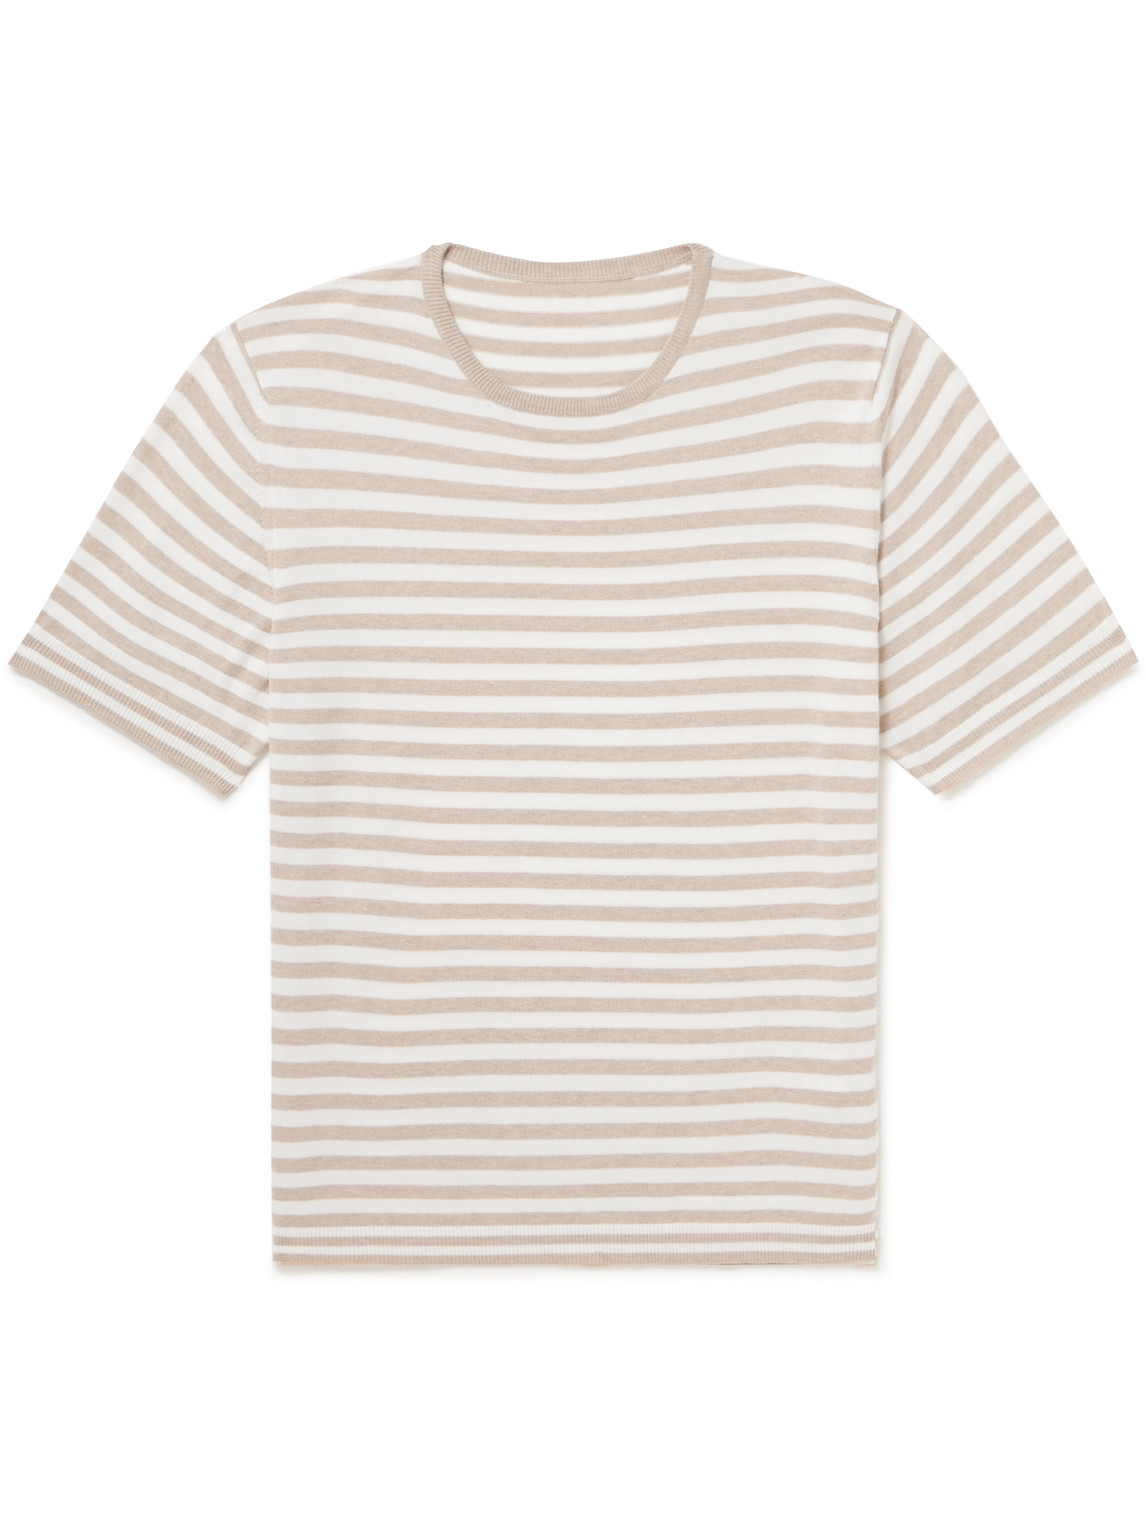 Anderson & Sheppard Striped Cotton T-Shirt